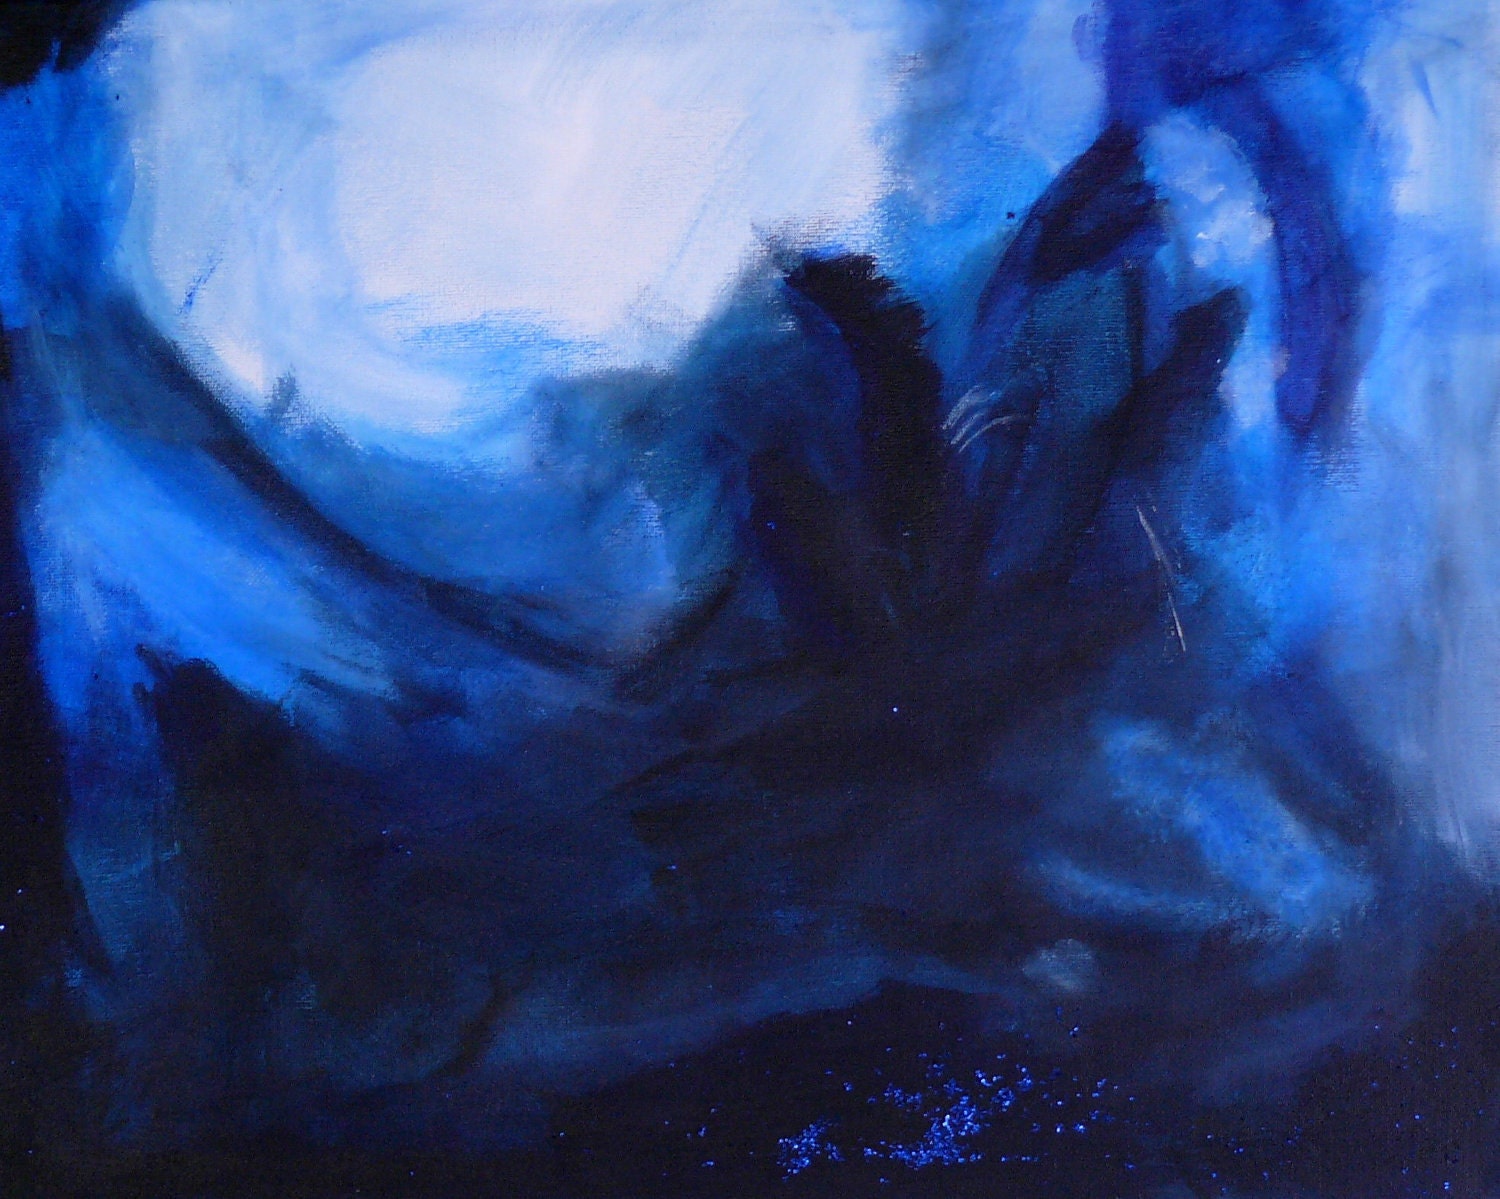 abstract artwork blue abstract acrylic painting original fine art print "Hypoxia" Featured in CATAPULT art mag issue 7